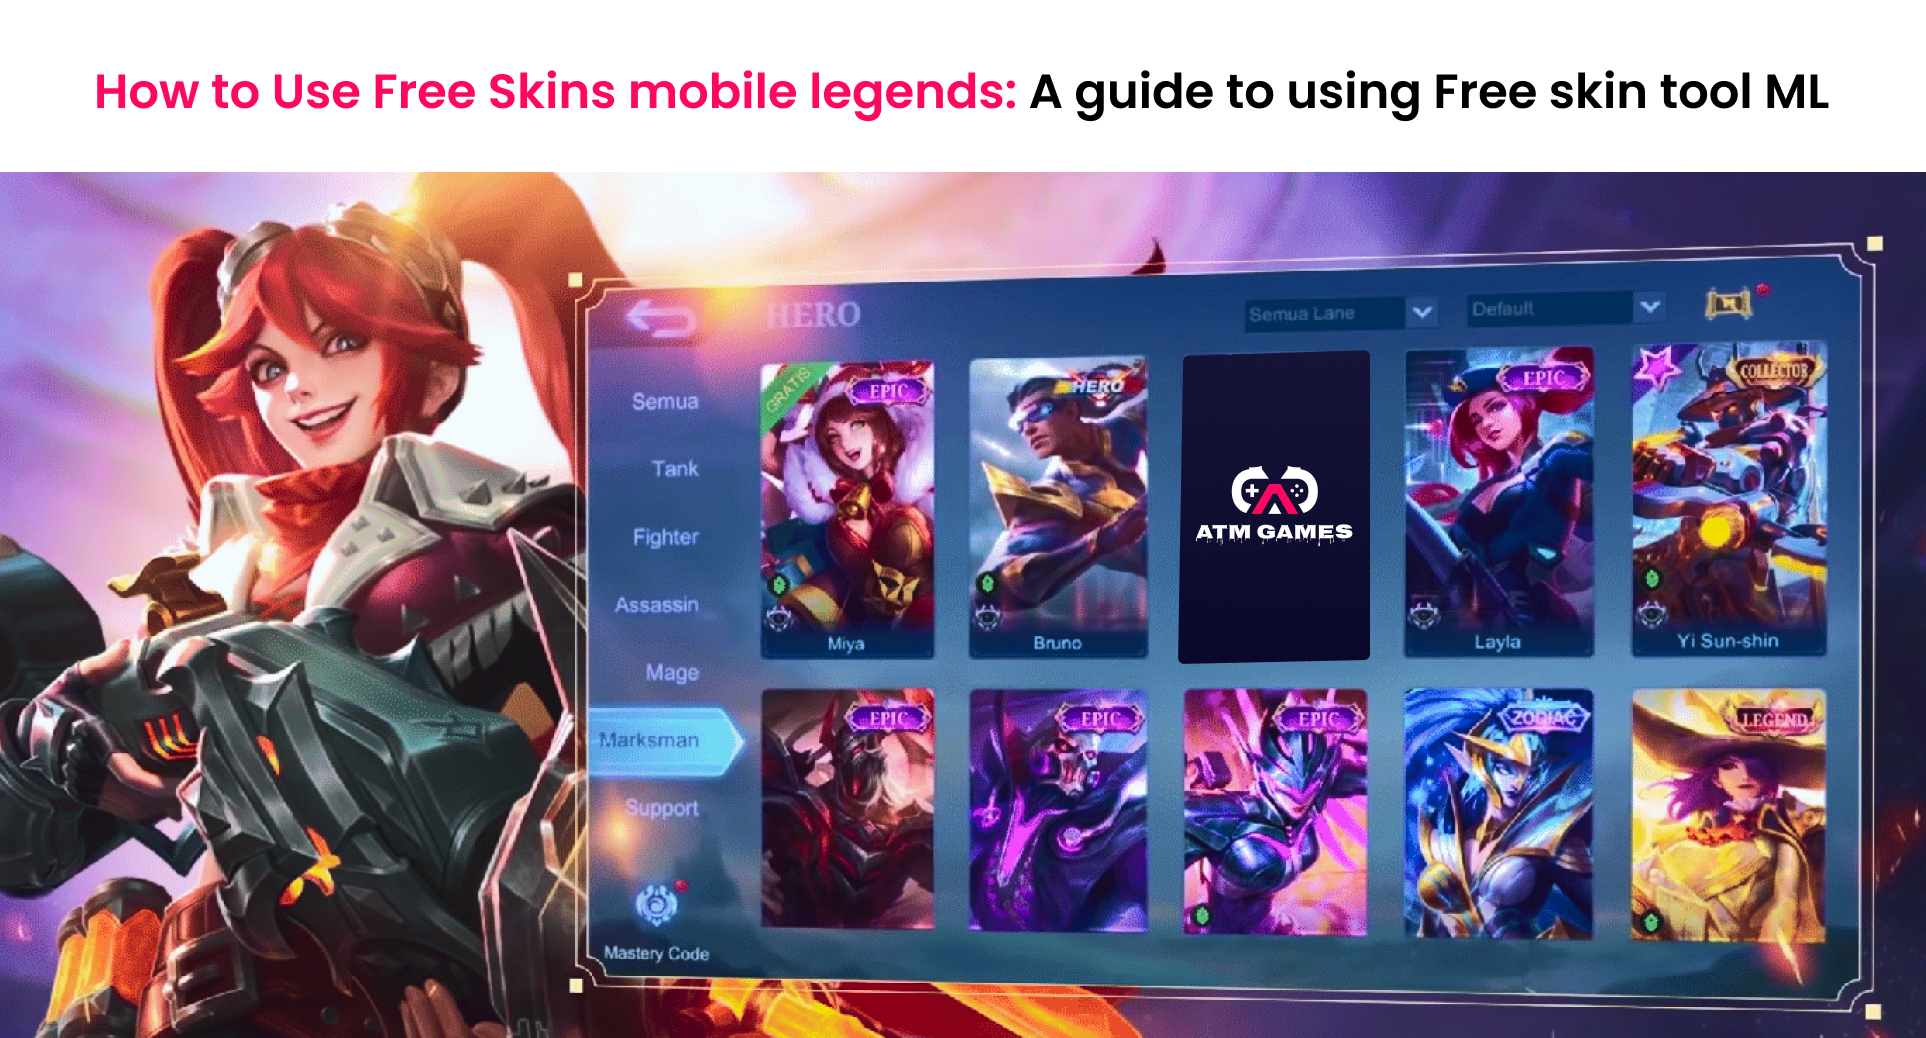 How to Use Free Mobile Legends:A guide to using free skin tool ML Atm HTML GAMES